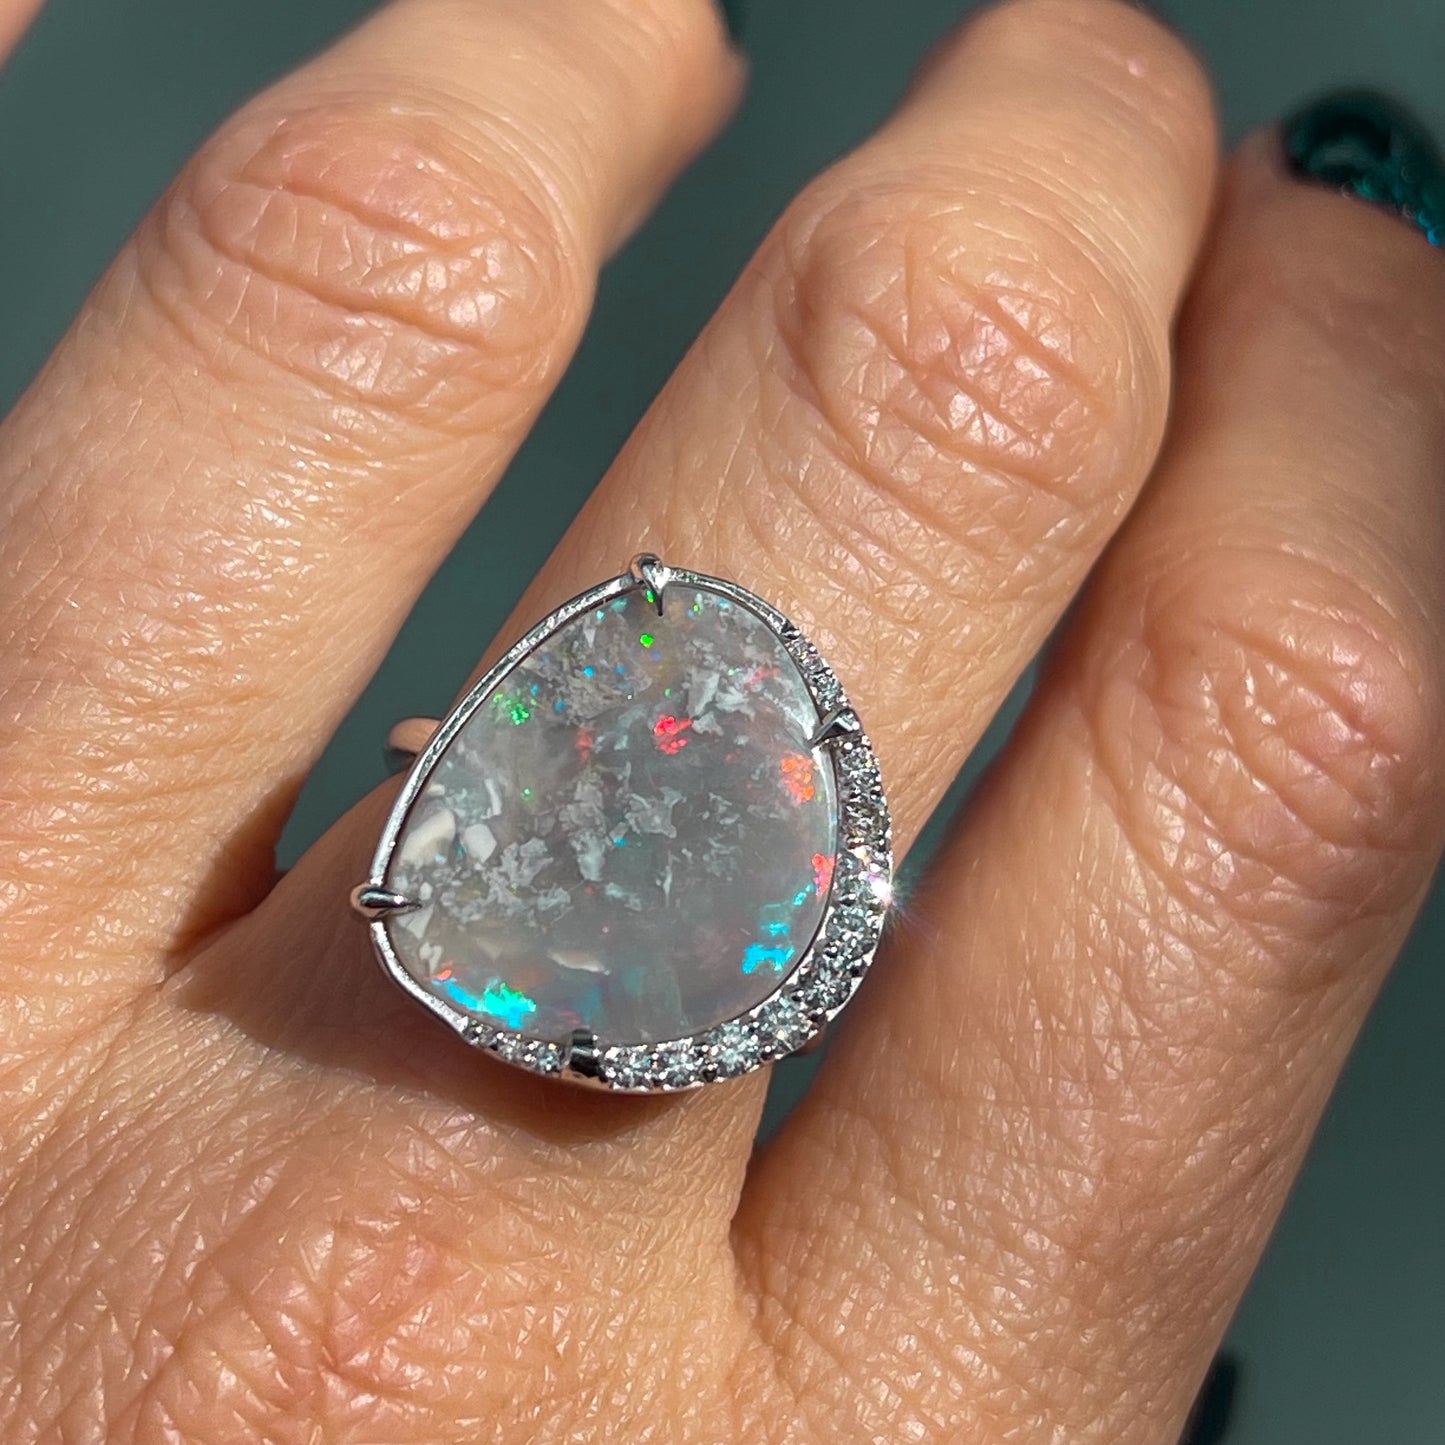 An Australian Opal Ring by NIXIN Jewelry in white gold with diamonds modeled on a hand.